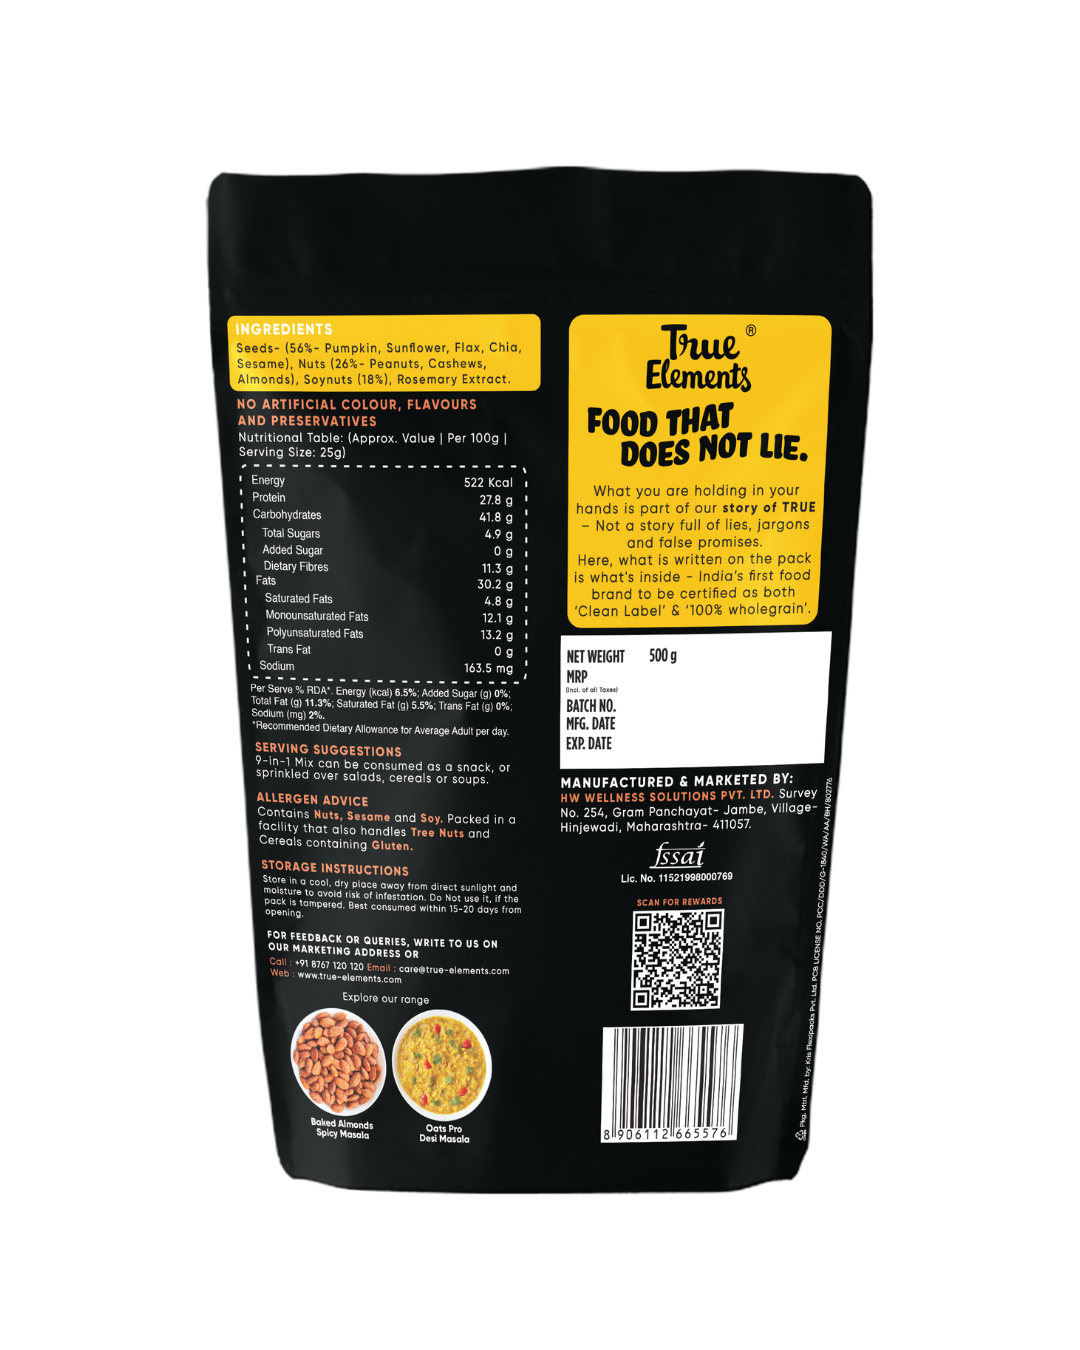 9 in 1 Snack Mix (20.7g Protein)